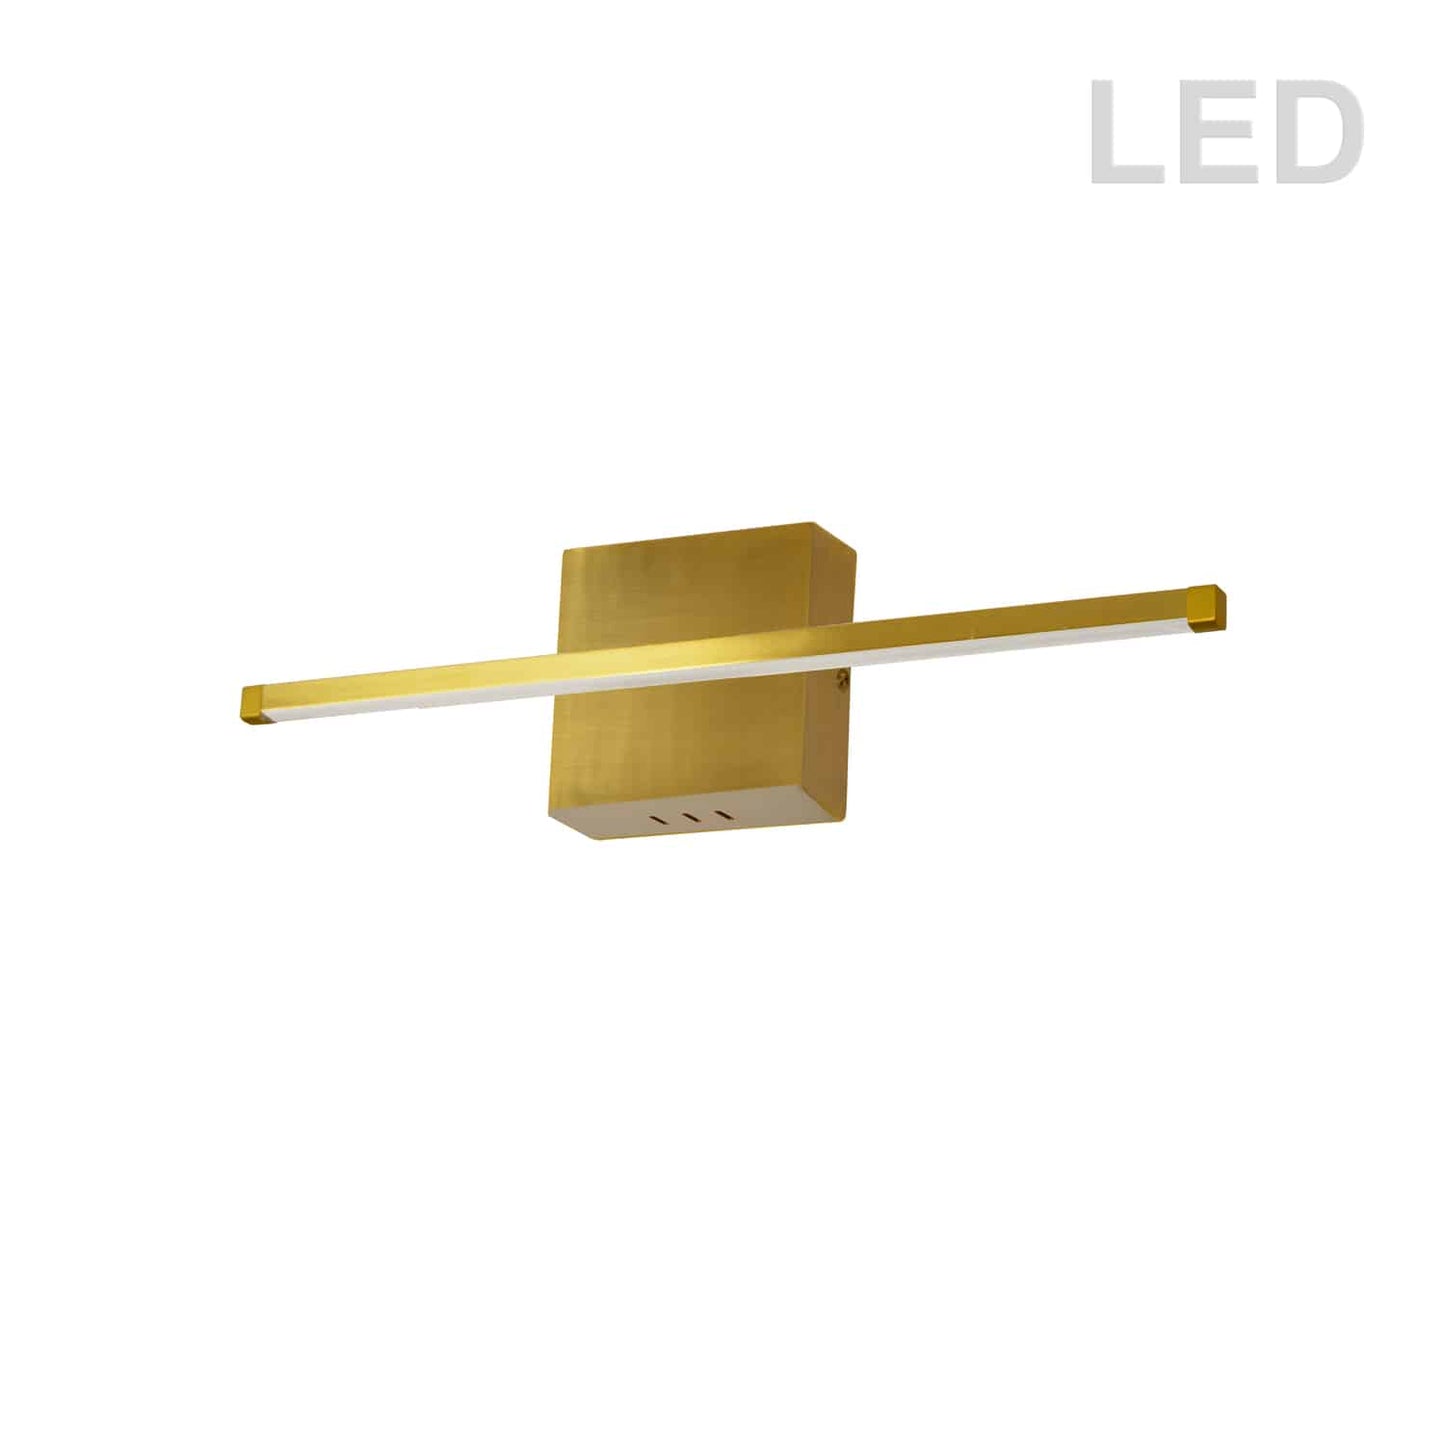 Dainolite ARY-2419LEDW-AGB 19W LED Wall Sconce, Aged Brass with White Acrylic Diffuser